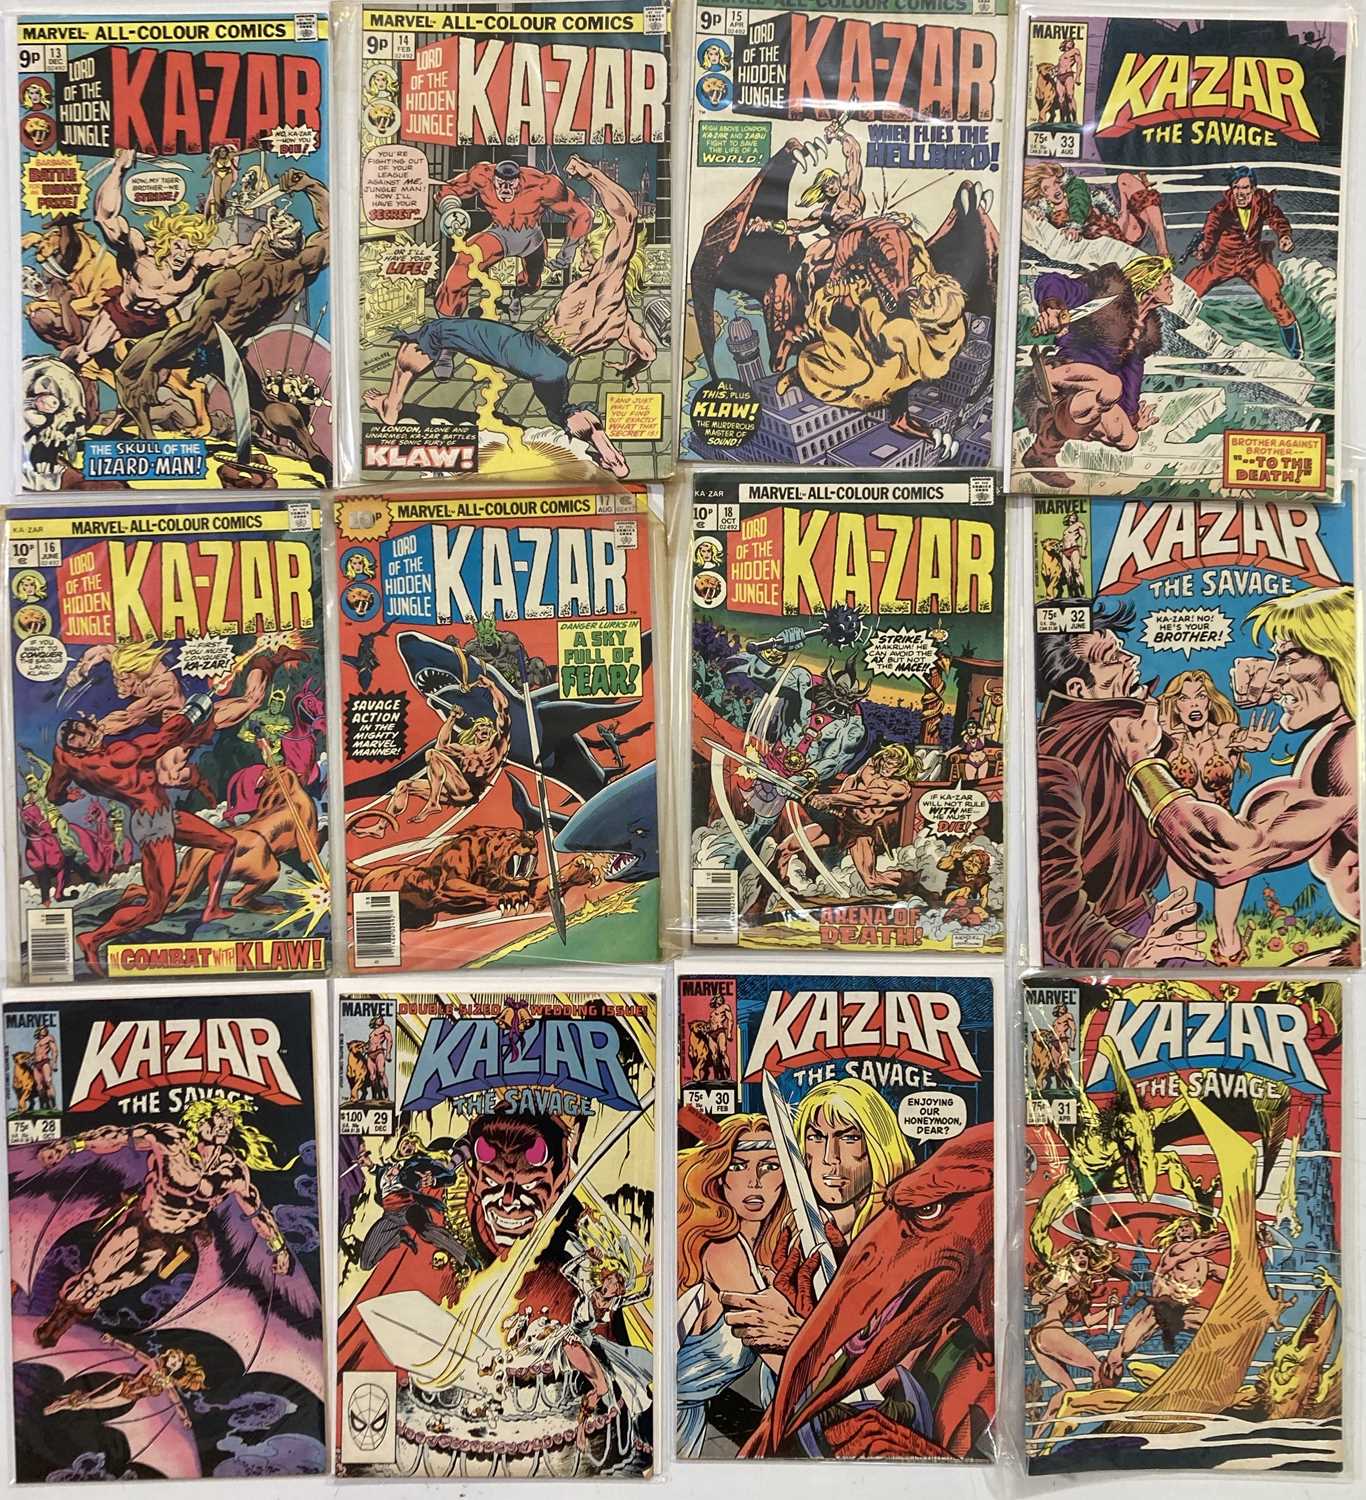 APPROX 49 MARVEL COMICS (CONAN THE BARBARIAN, KULL THE CONQUEROR, KAZAR THE SAVAGE) - Image 4 of 5